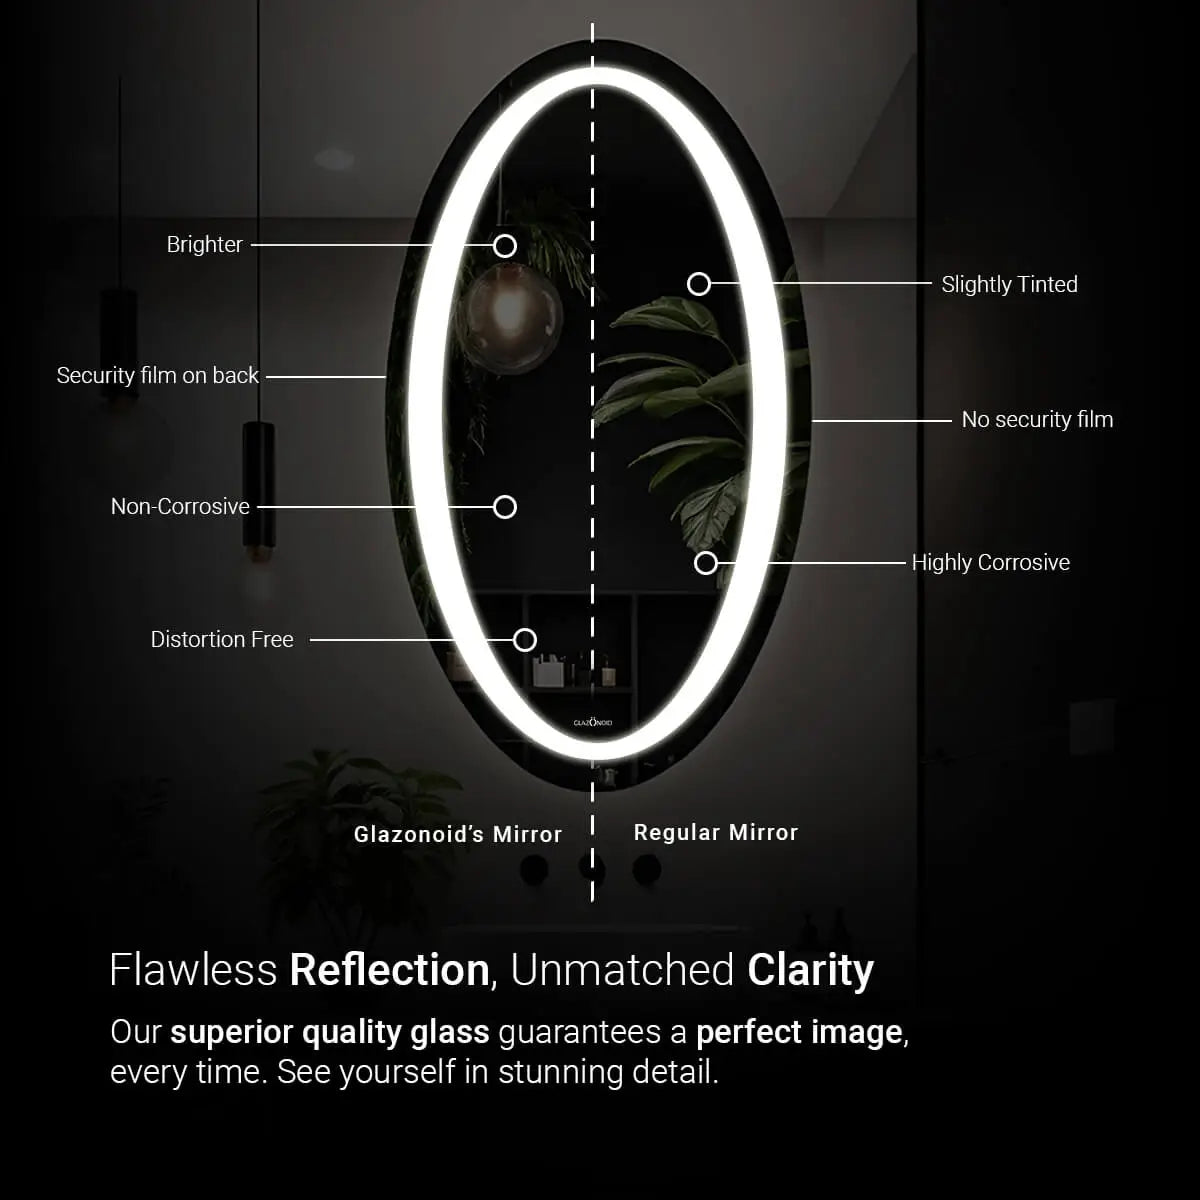 Modern and stylish looking frameless bathroom mirror with a crystal white LED light running across the edge. The mirror is described as having distortion-free, flawless reflection, and unmatched clarity. It is perfect for any bathroom vanity.